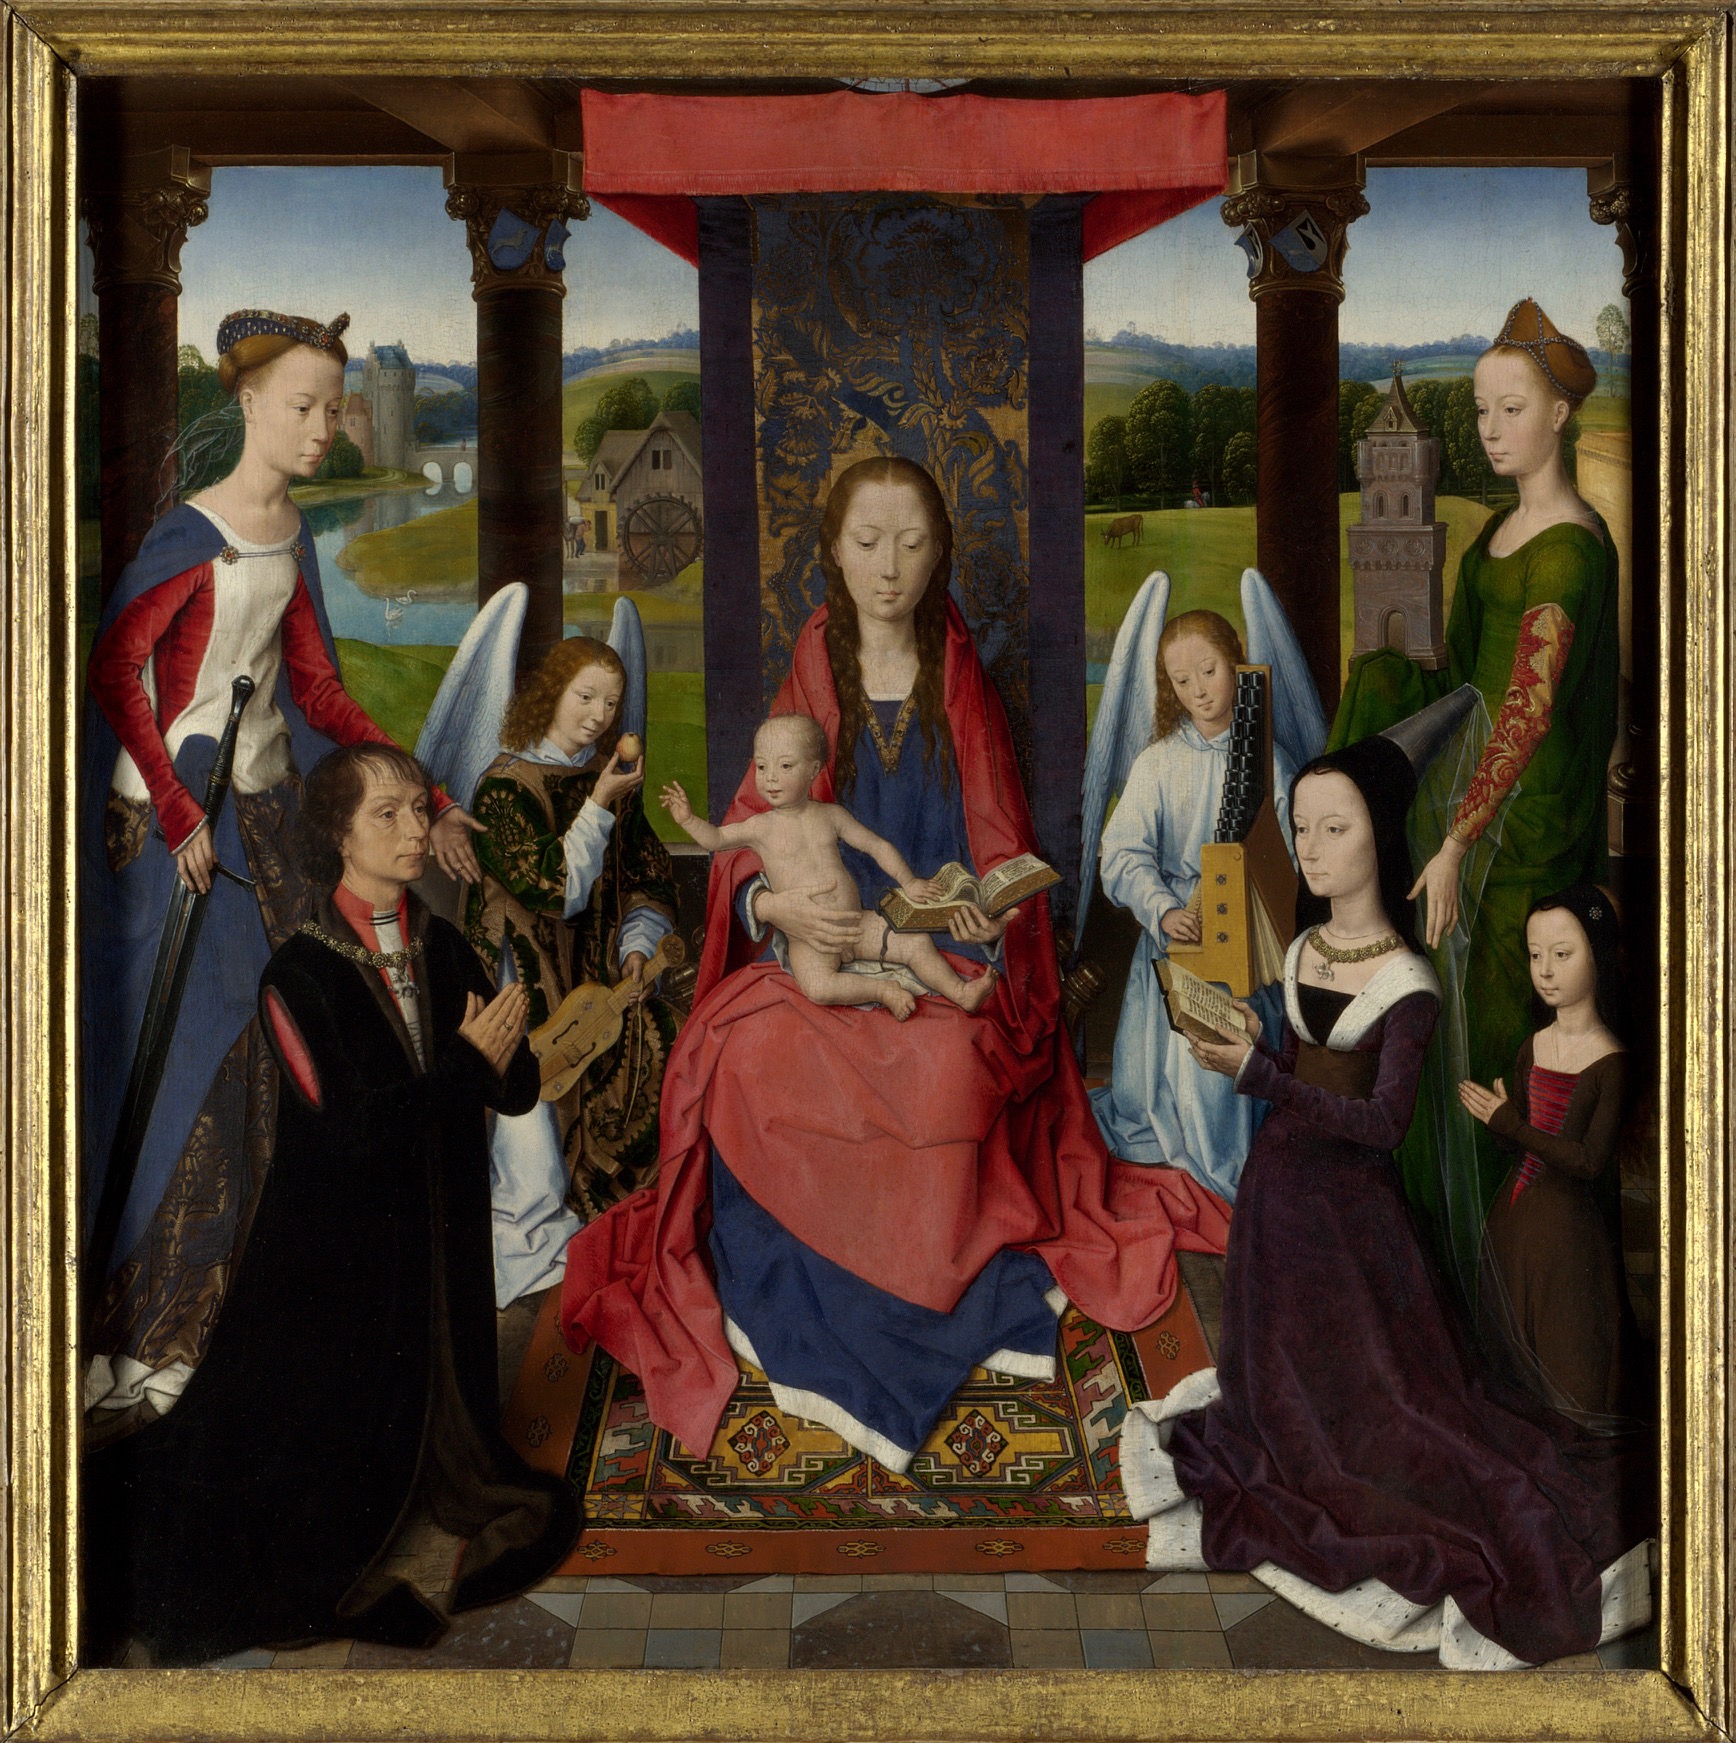 Painting of Jesus and Mary with angels and visitors